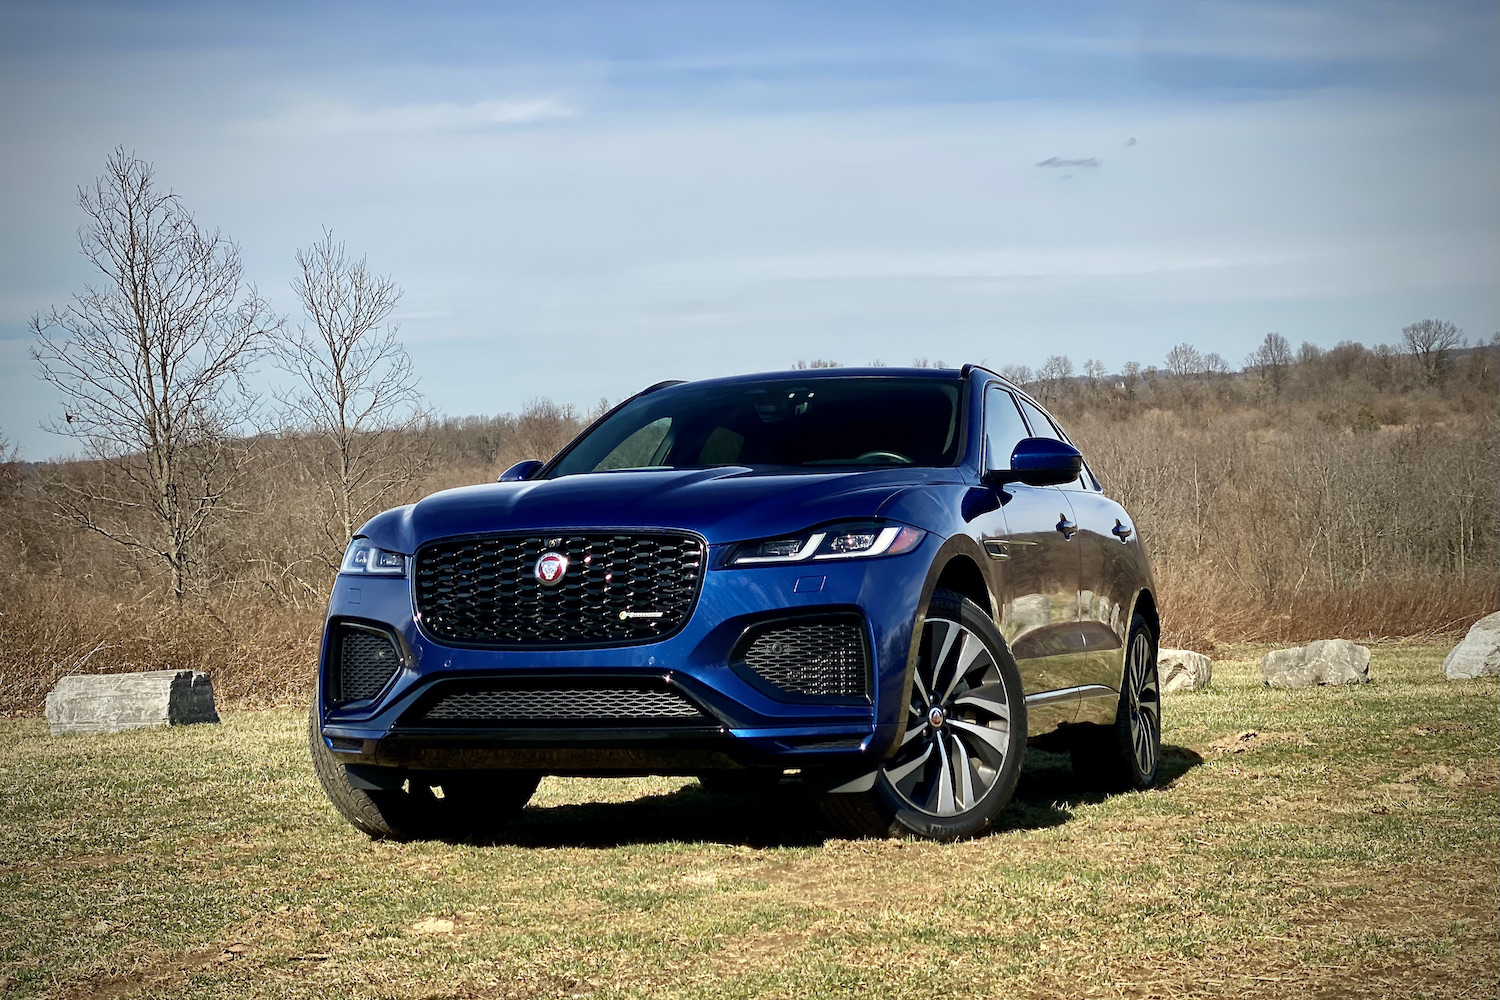 2022 Jaguar F-Pace R Dynamic S front end angle from driver's side in a grassy field.